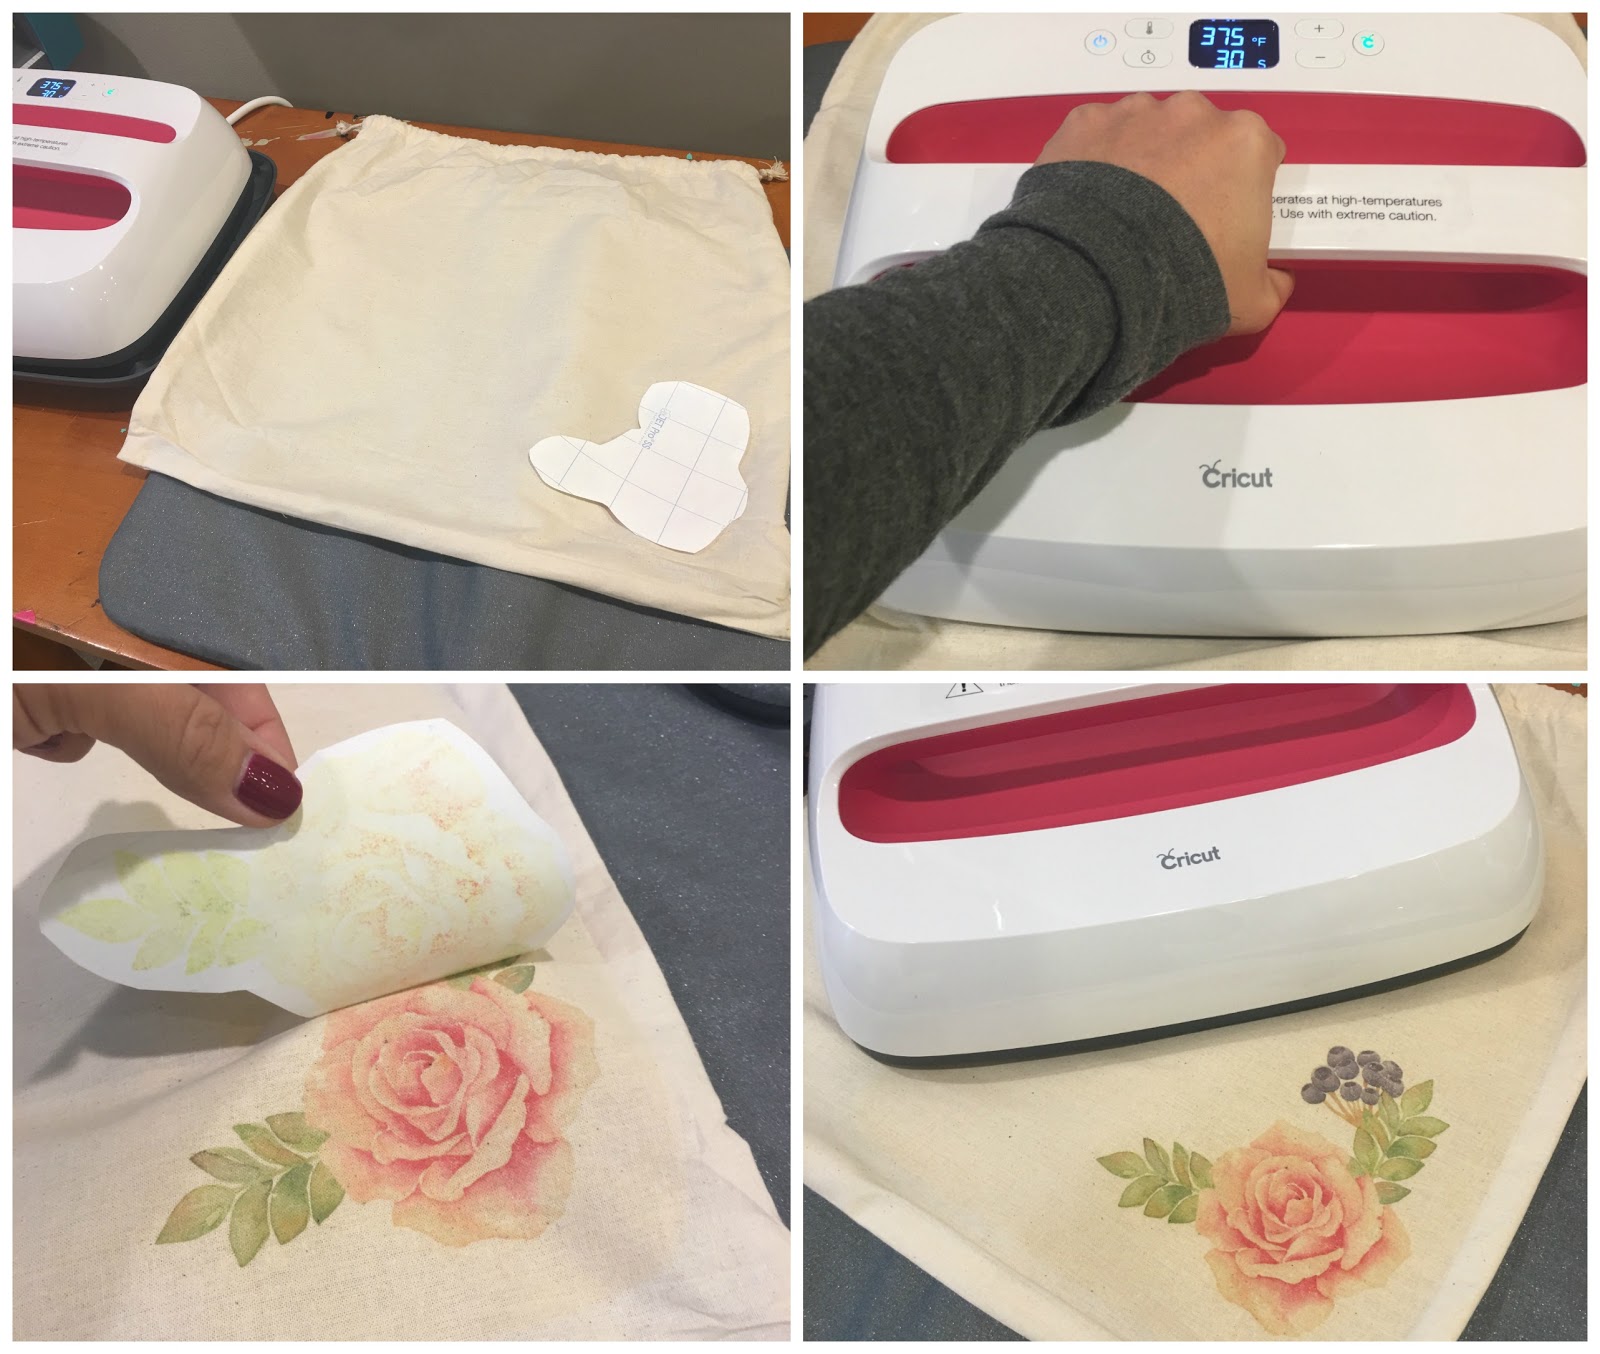 Cricut EasyPress2 versus Singer Steam Press: How do they stack up